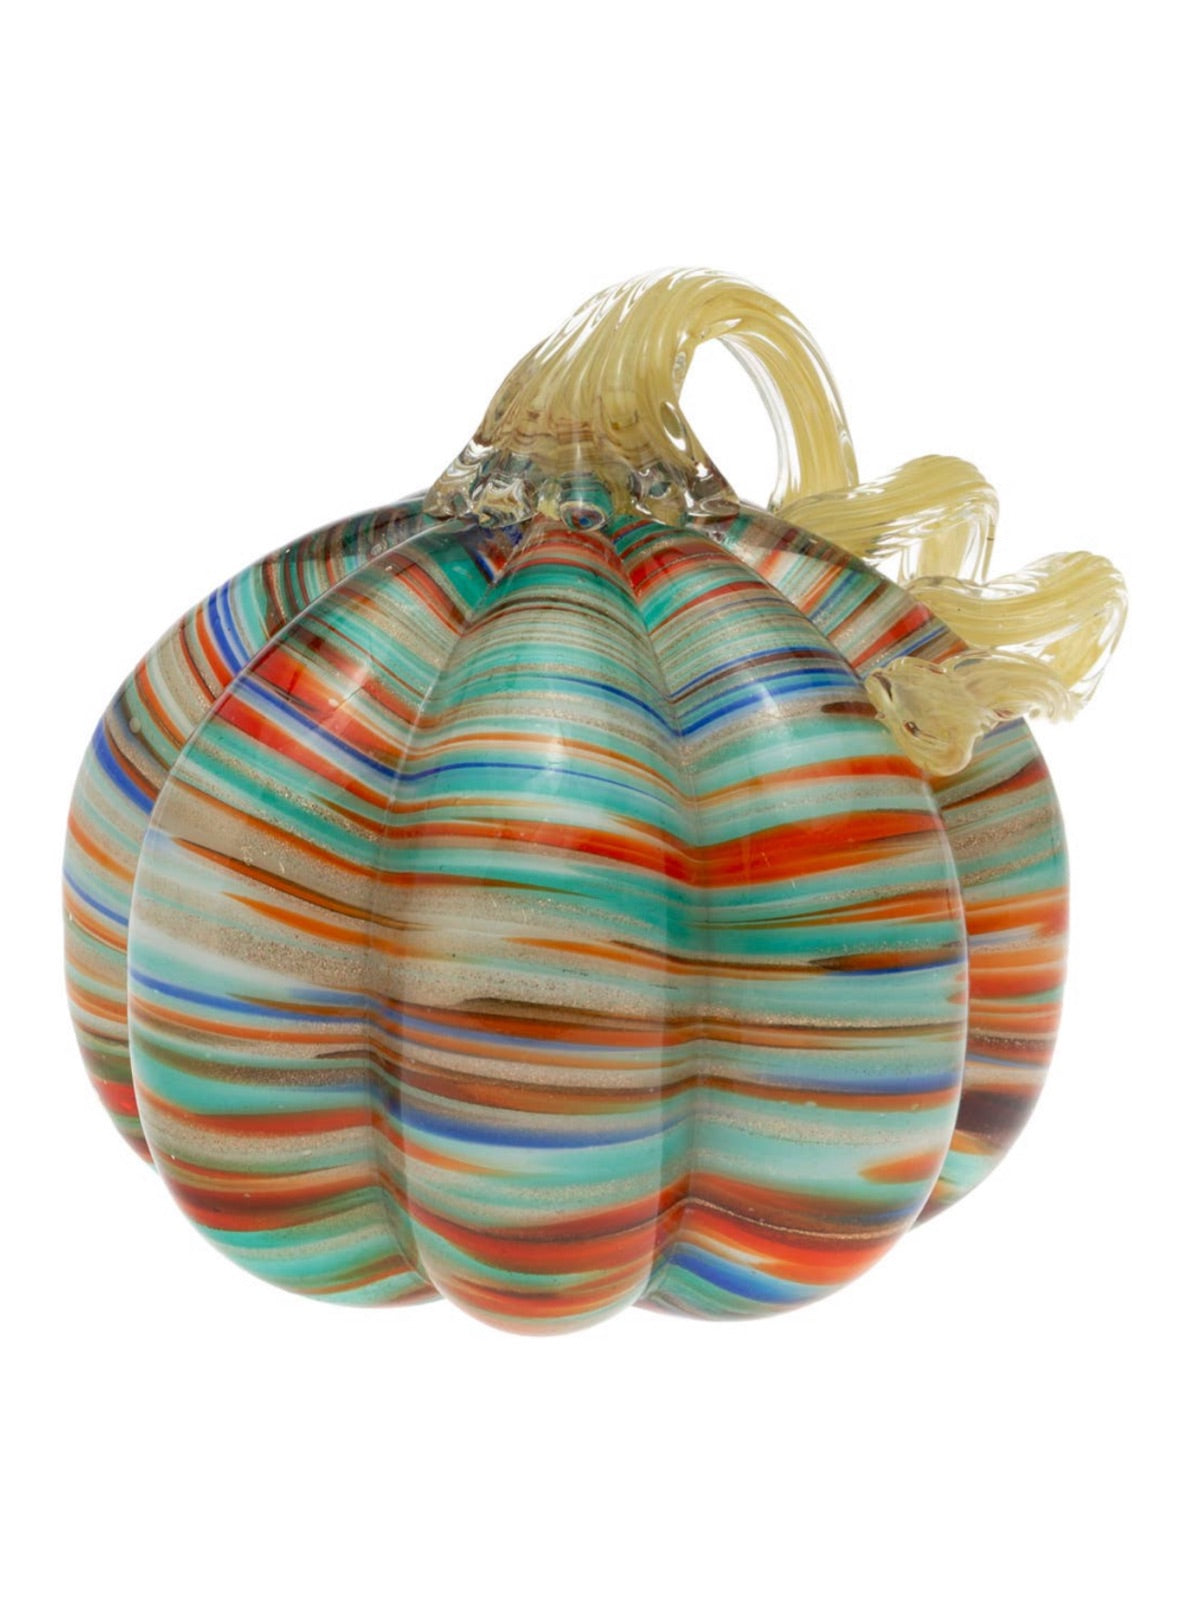 This classic seasonal accent interprets a sunset strip glass pumpkin with gold stem measures. A pretty pumpkin palette for your fall dining and decor.